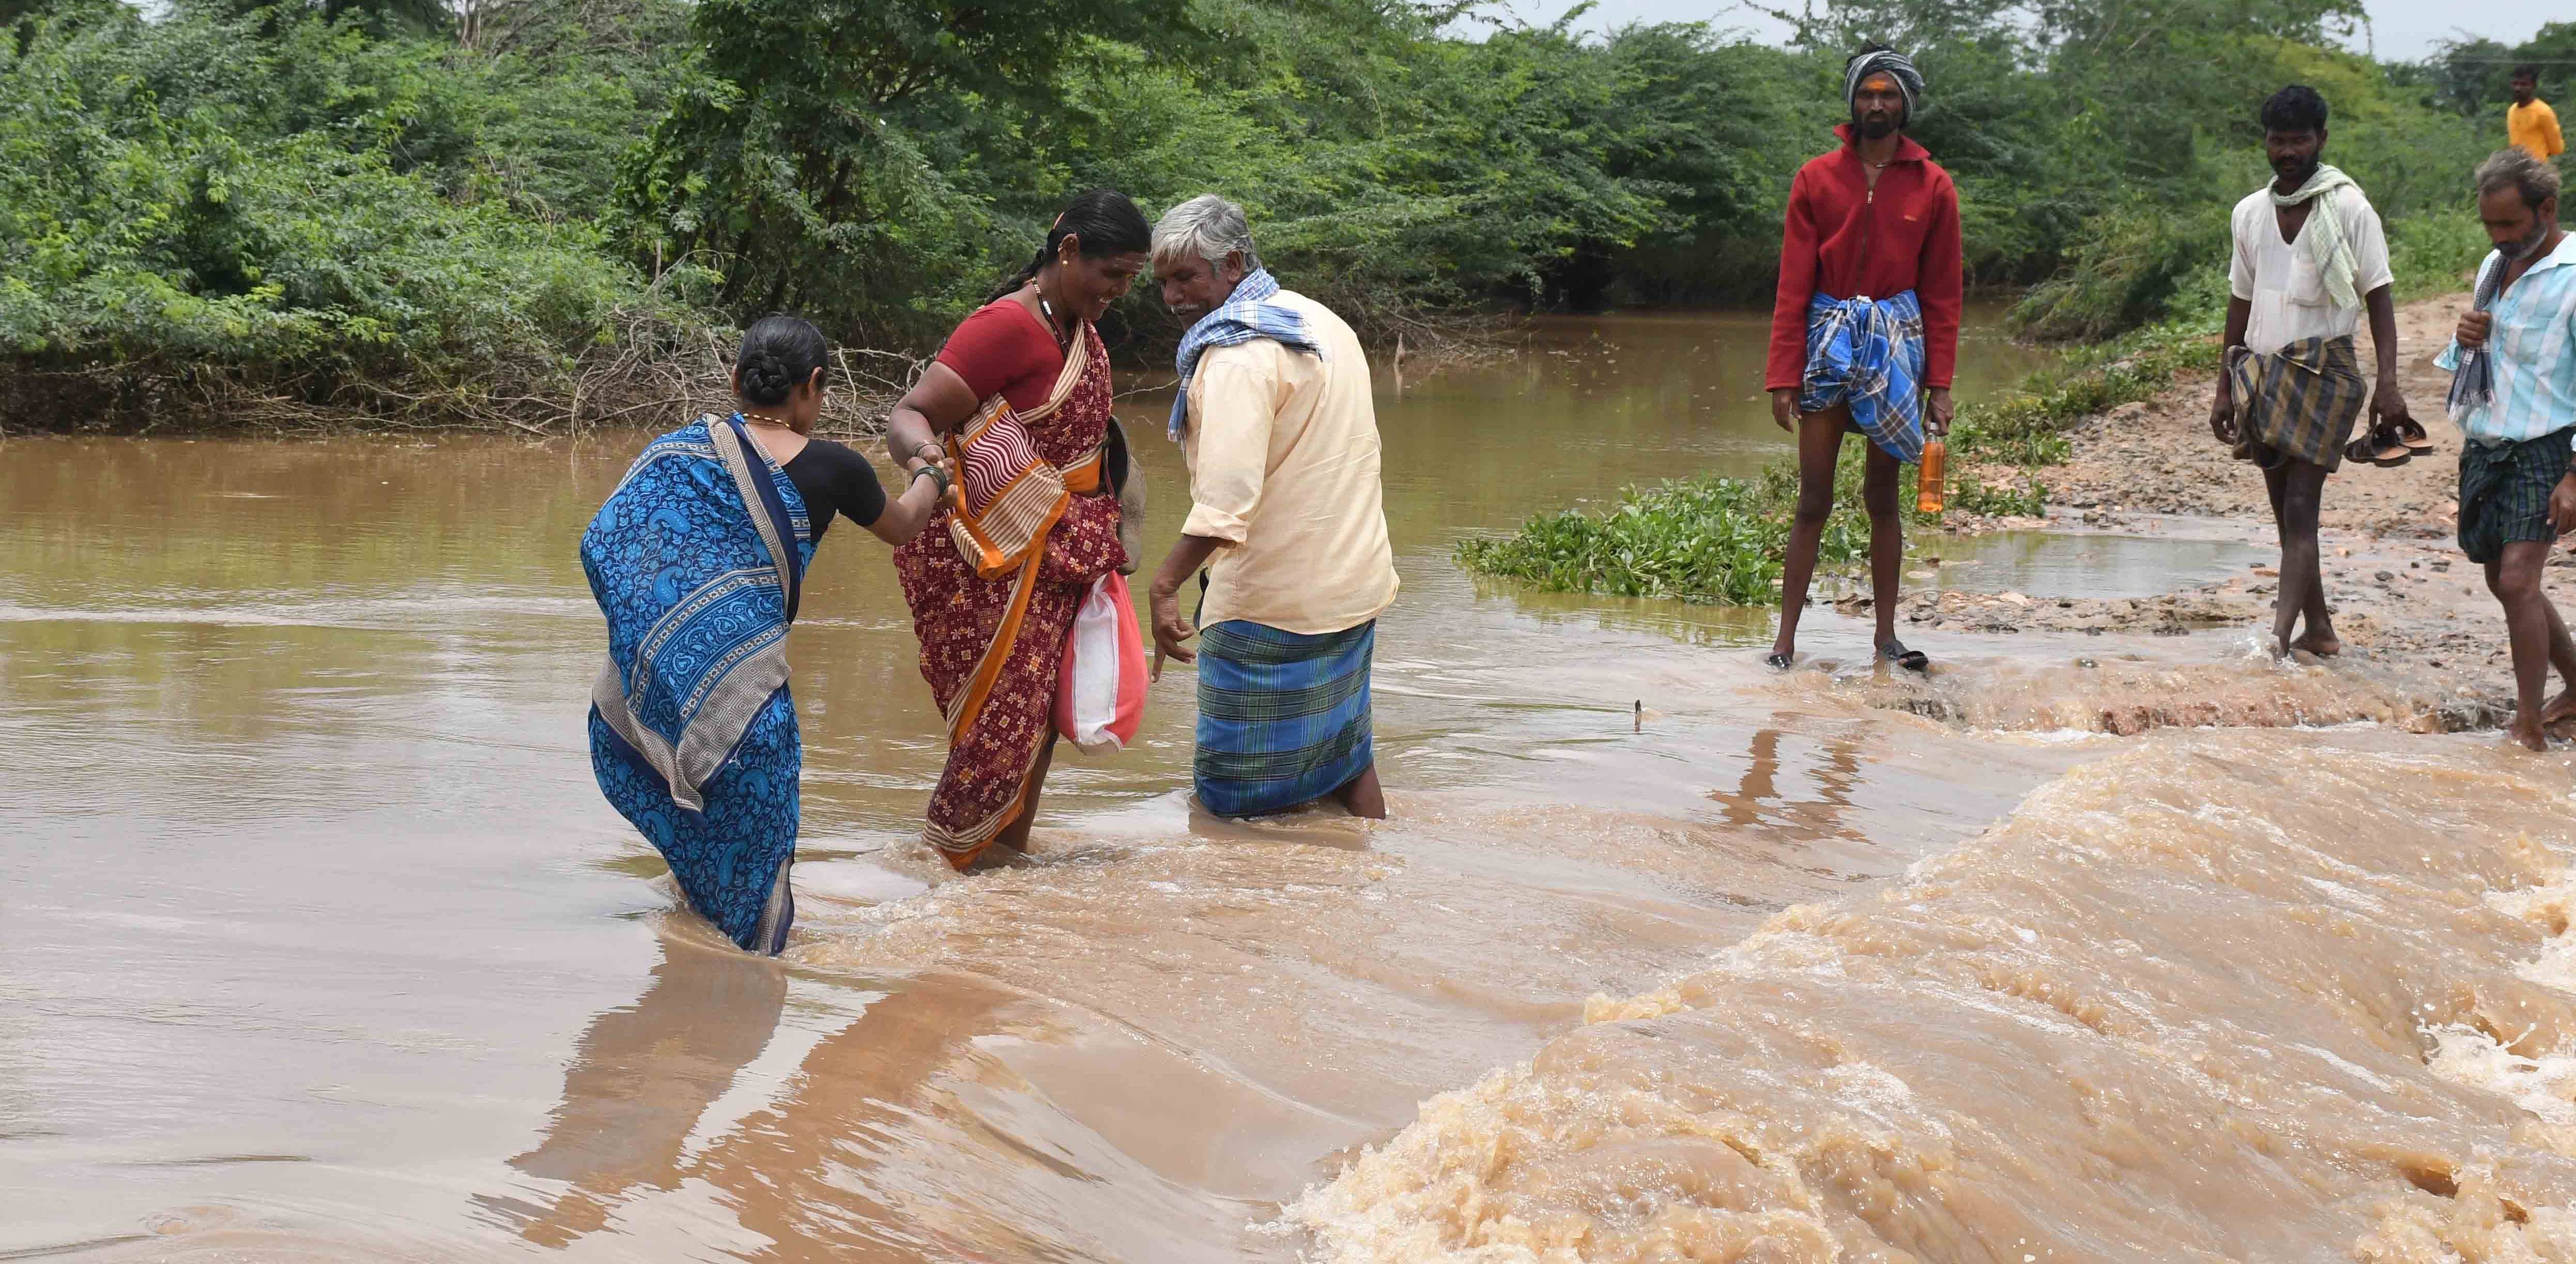 Karnataka has been allocated Rs 577.84 crore for dealing with the damages due to floods and landslides during the South-West Monsoon while Rs 611.61 crore has been allocated for Madhya Pradesh and Rs 87.84 crore for Sikkim. Credit: DH Photo